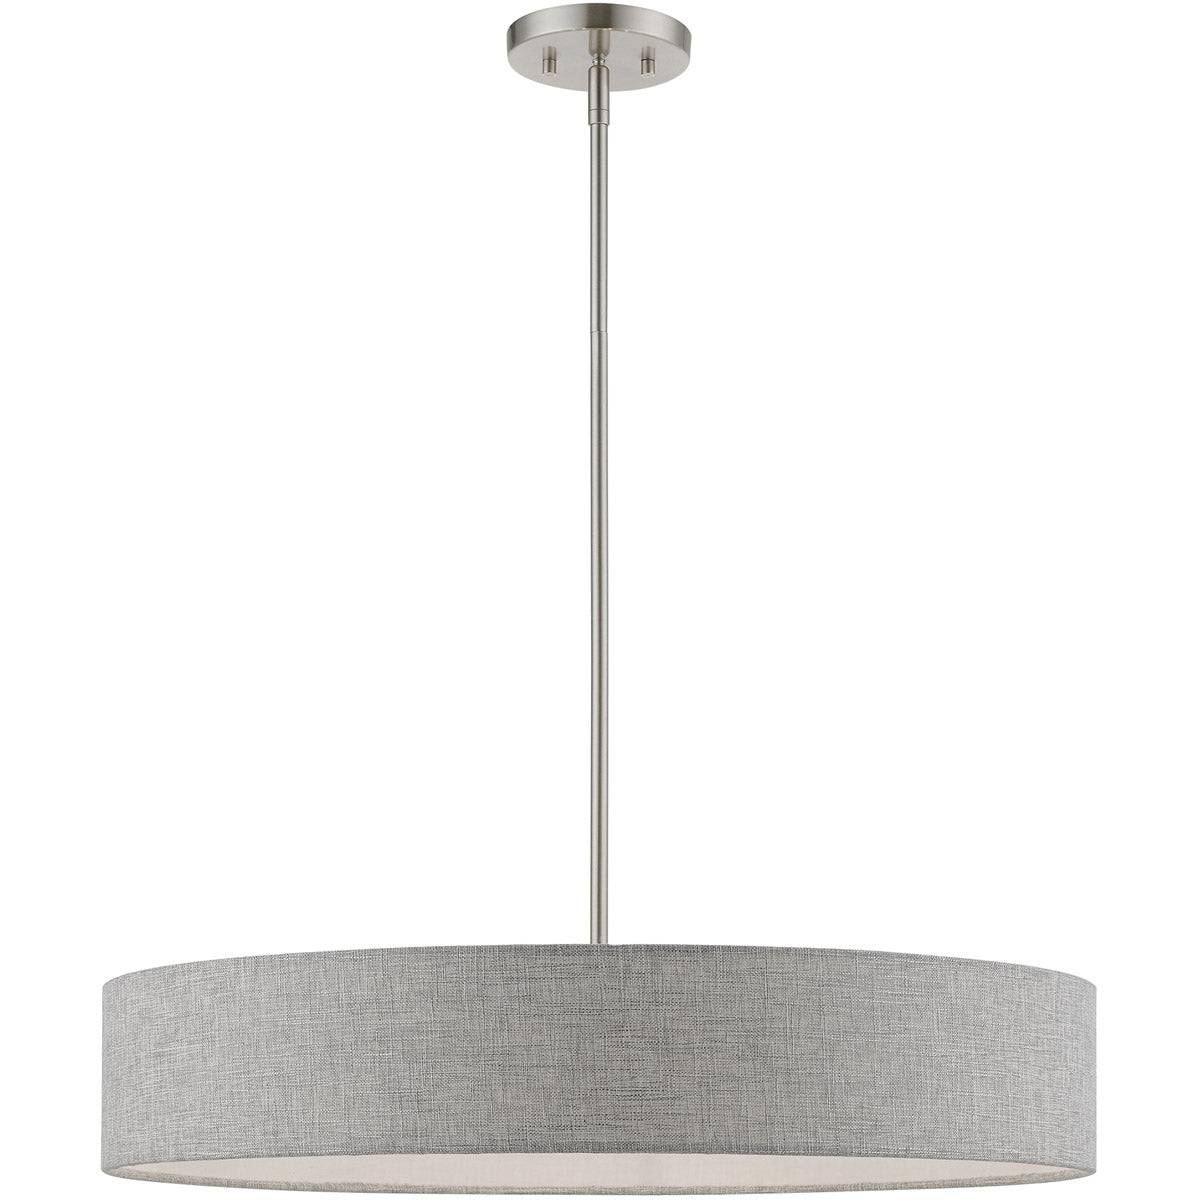 Elmhurst 5 Light 26 inch Pendant-Livex Lighting-LIVEX-46145-91-PendantsBrushed Nickel with Shiny White Accents-1-France and Son